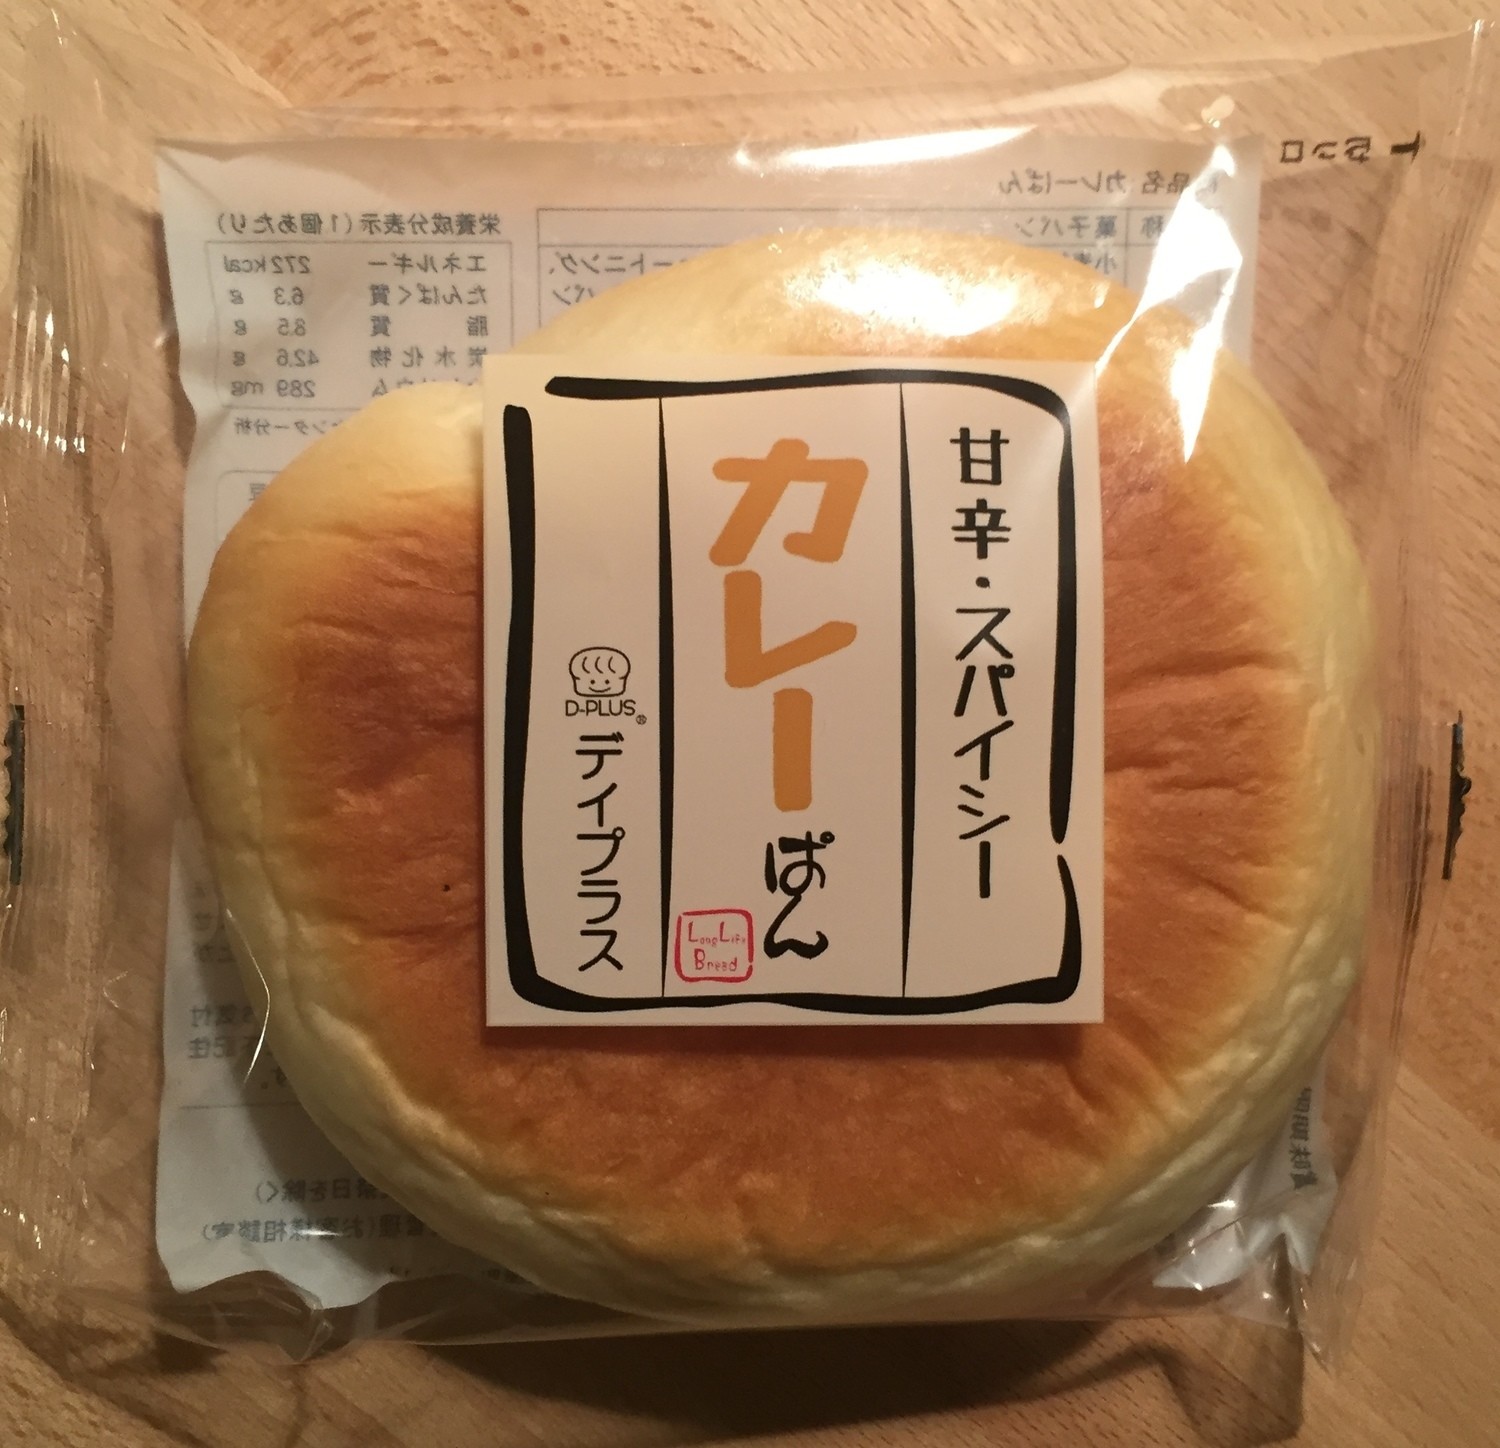 D-Plus "Curry Pan", Bread with Curry Filling